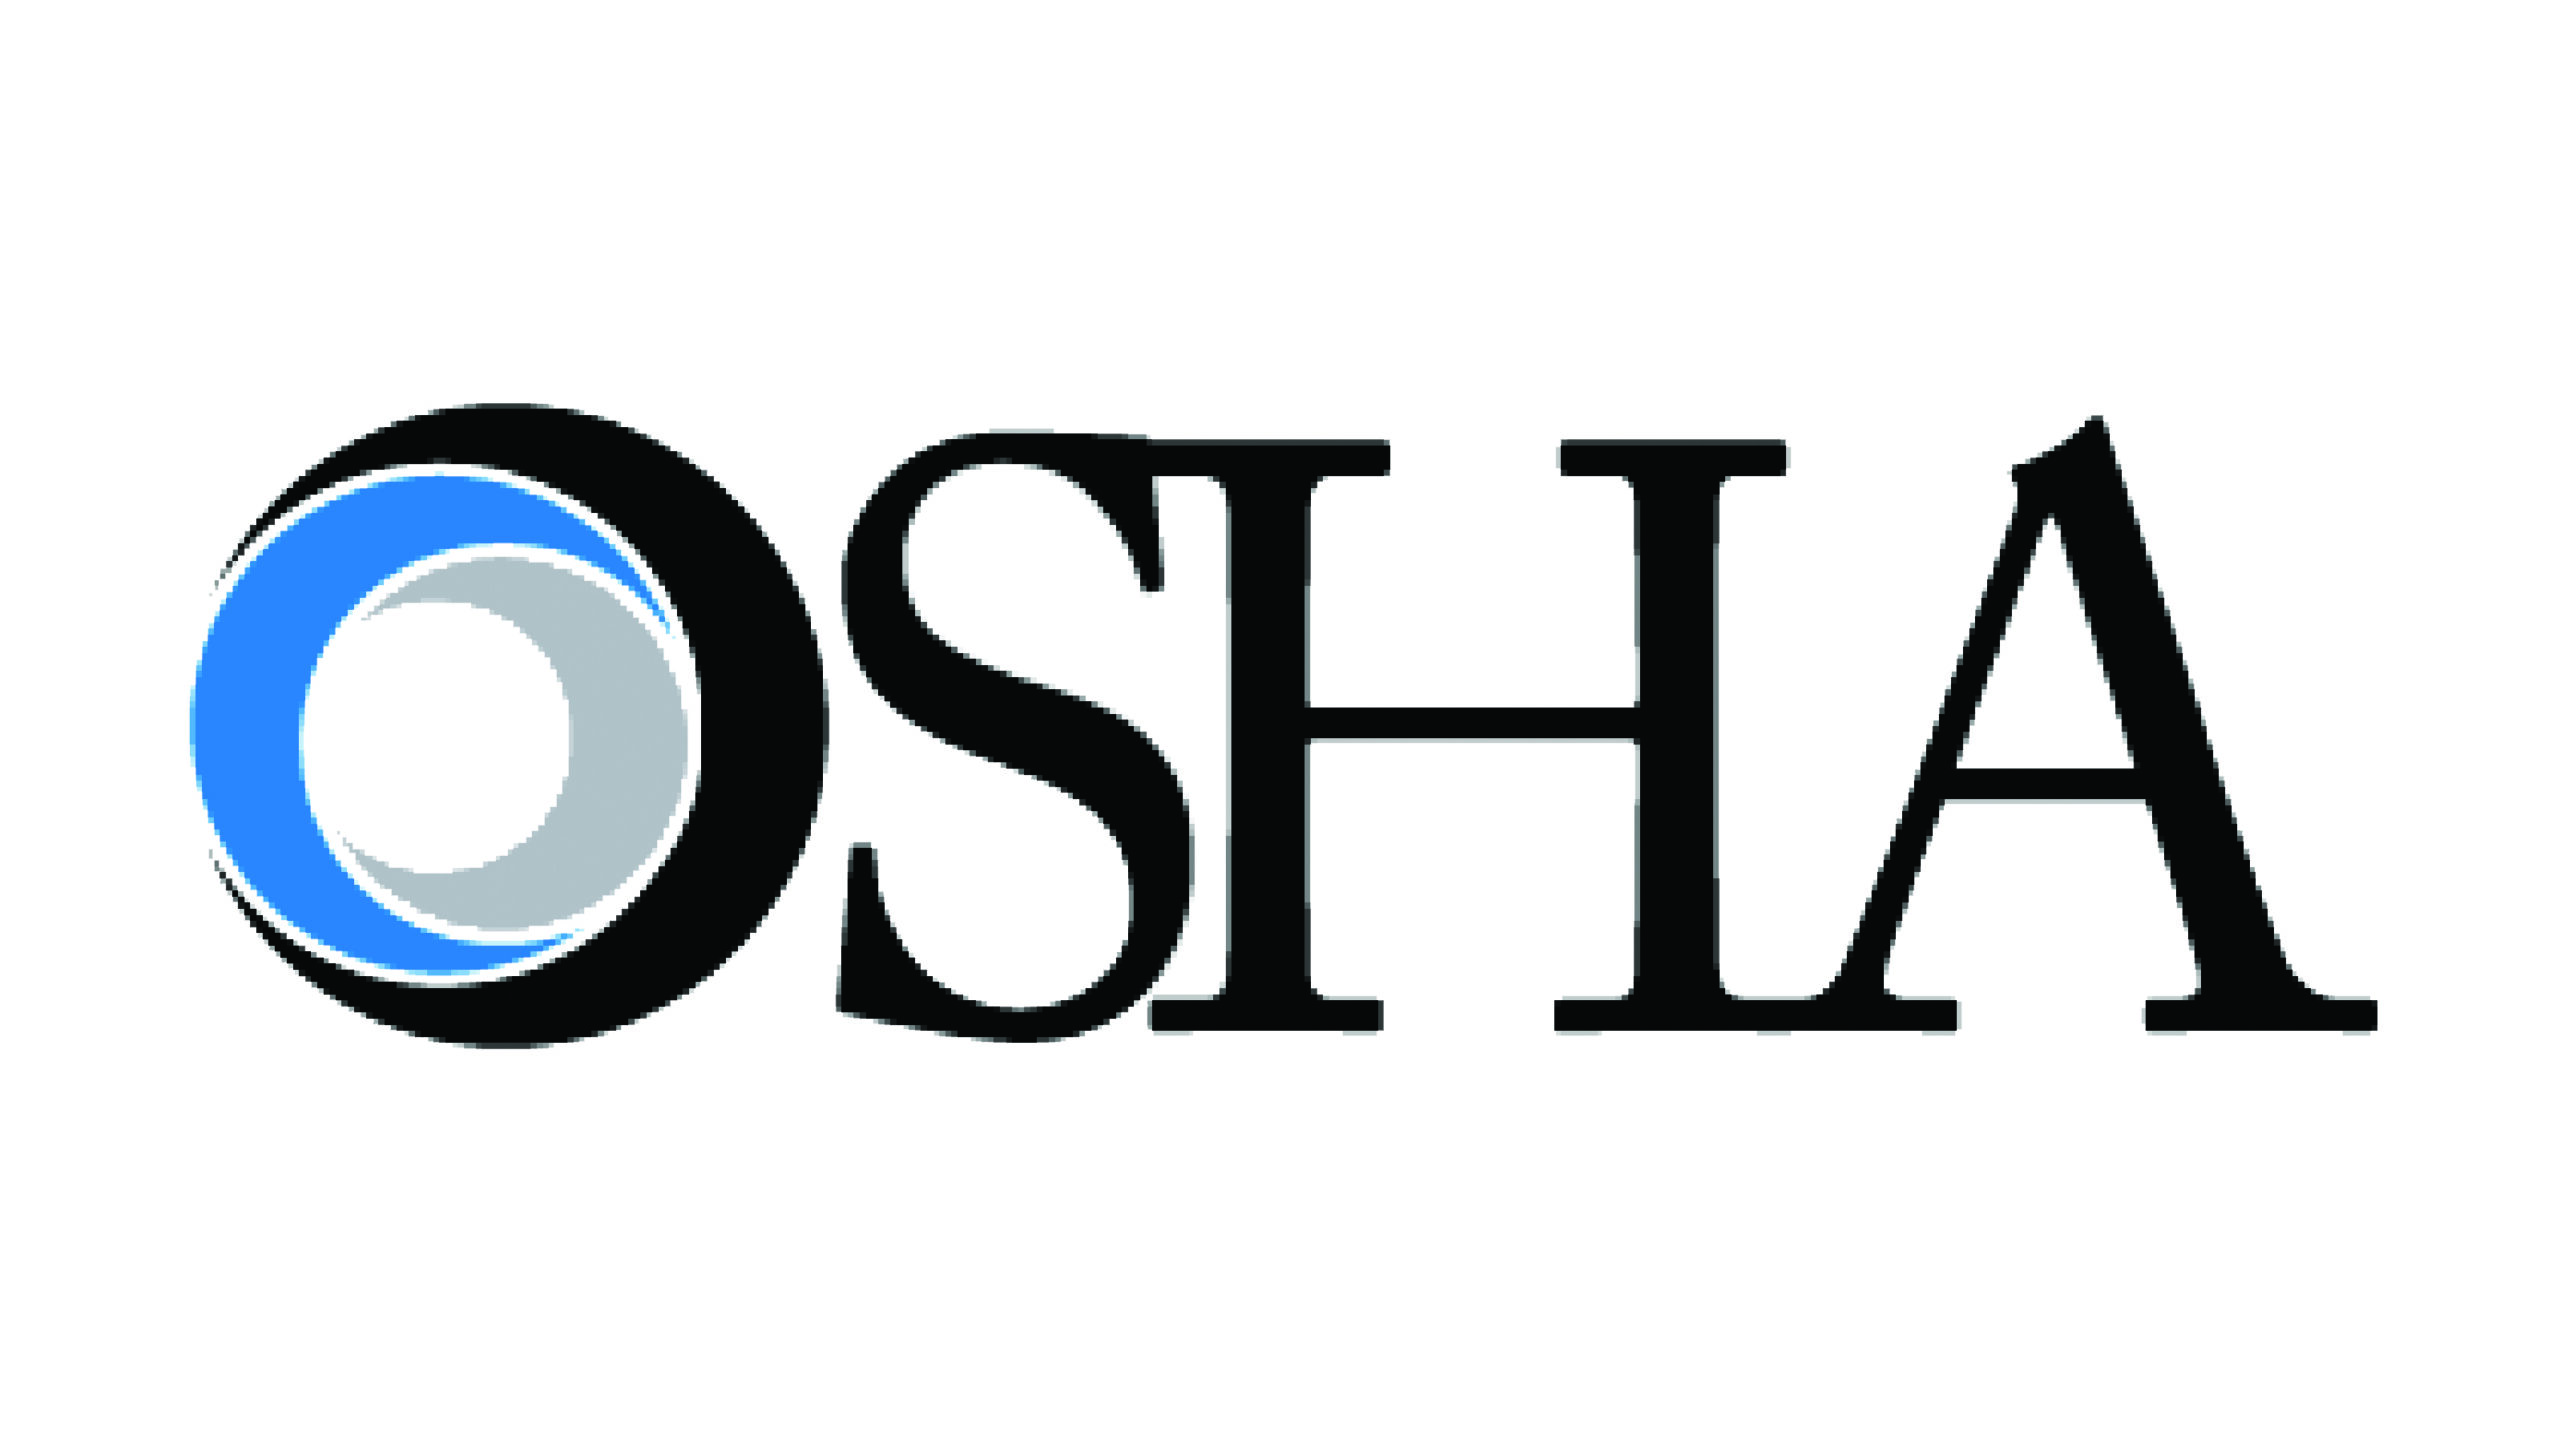 OSHA Wins Trademark Battle Against Safety Consulting Firm’s Logo